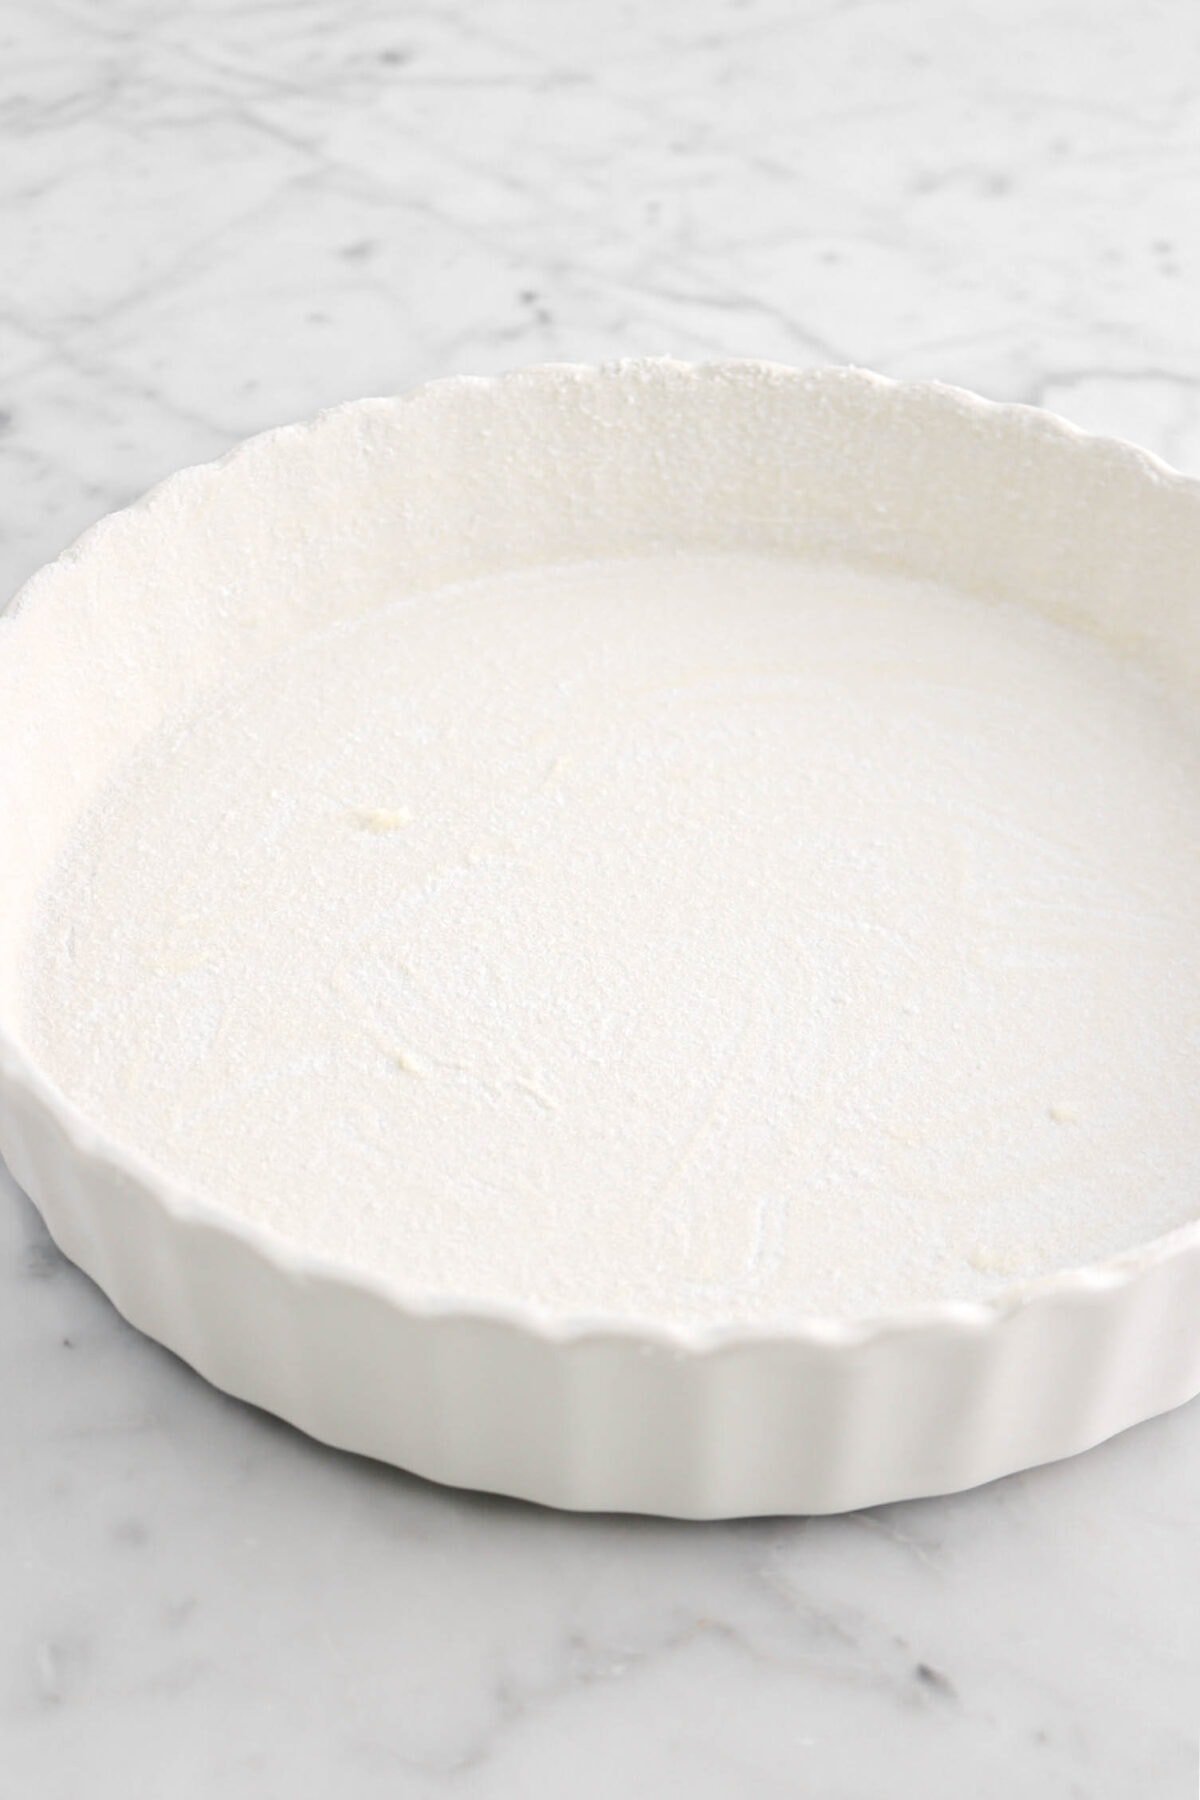 butter and sugar coating pie pan